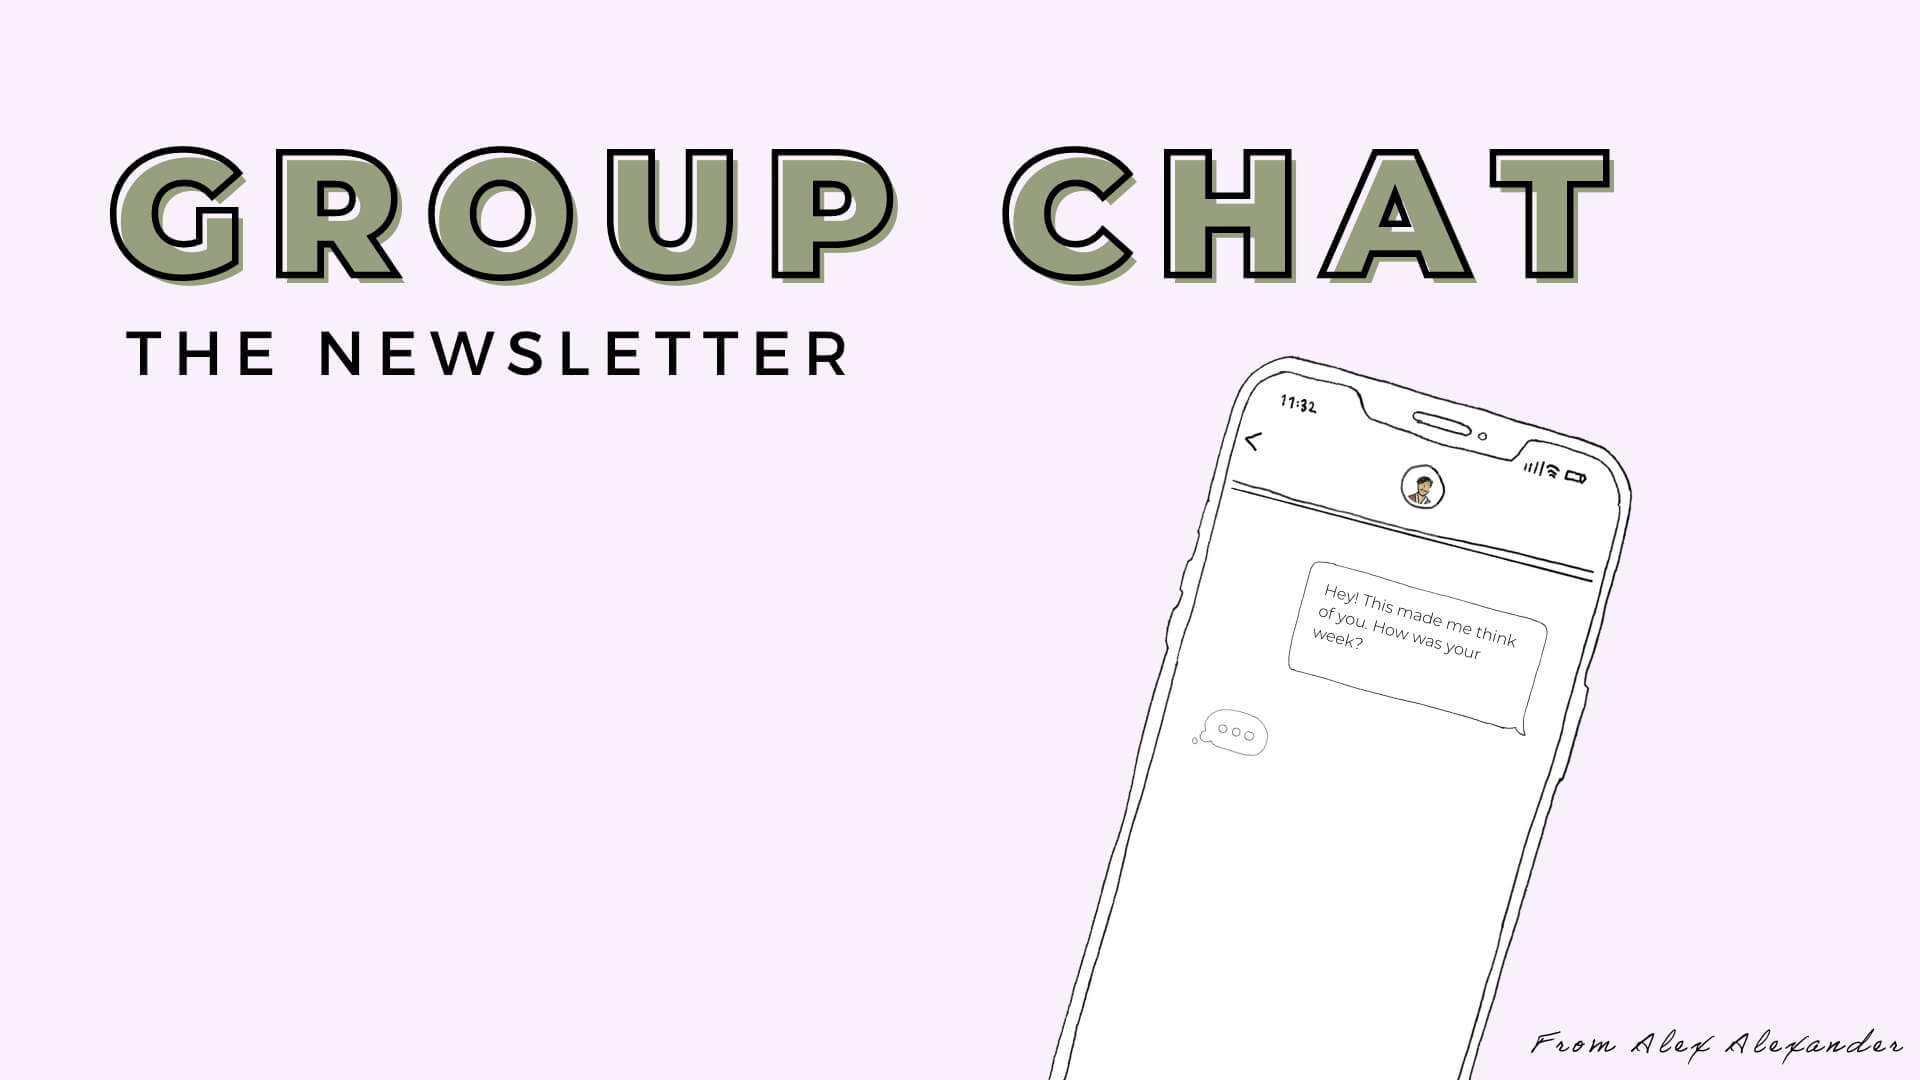 Group Chat, The Newsletter with a illustrated phone with a text message on the side of the image.